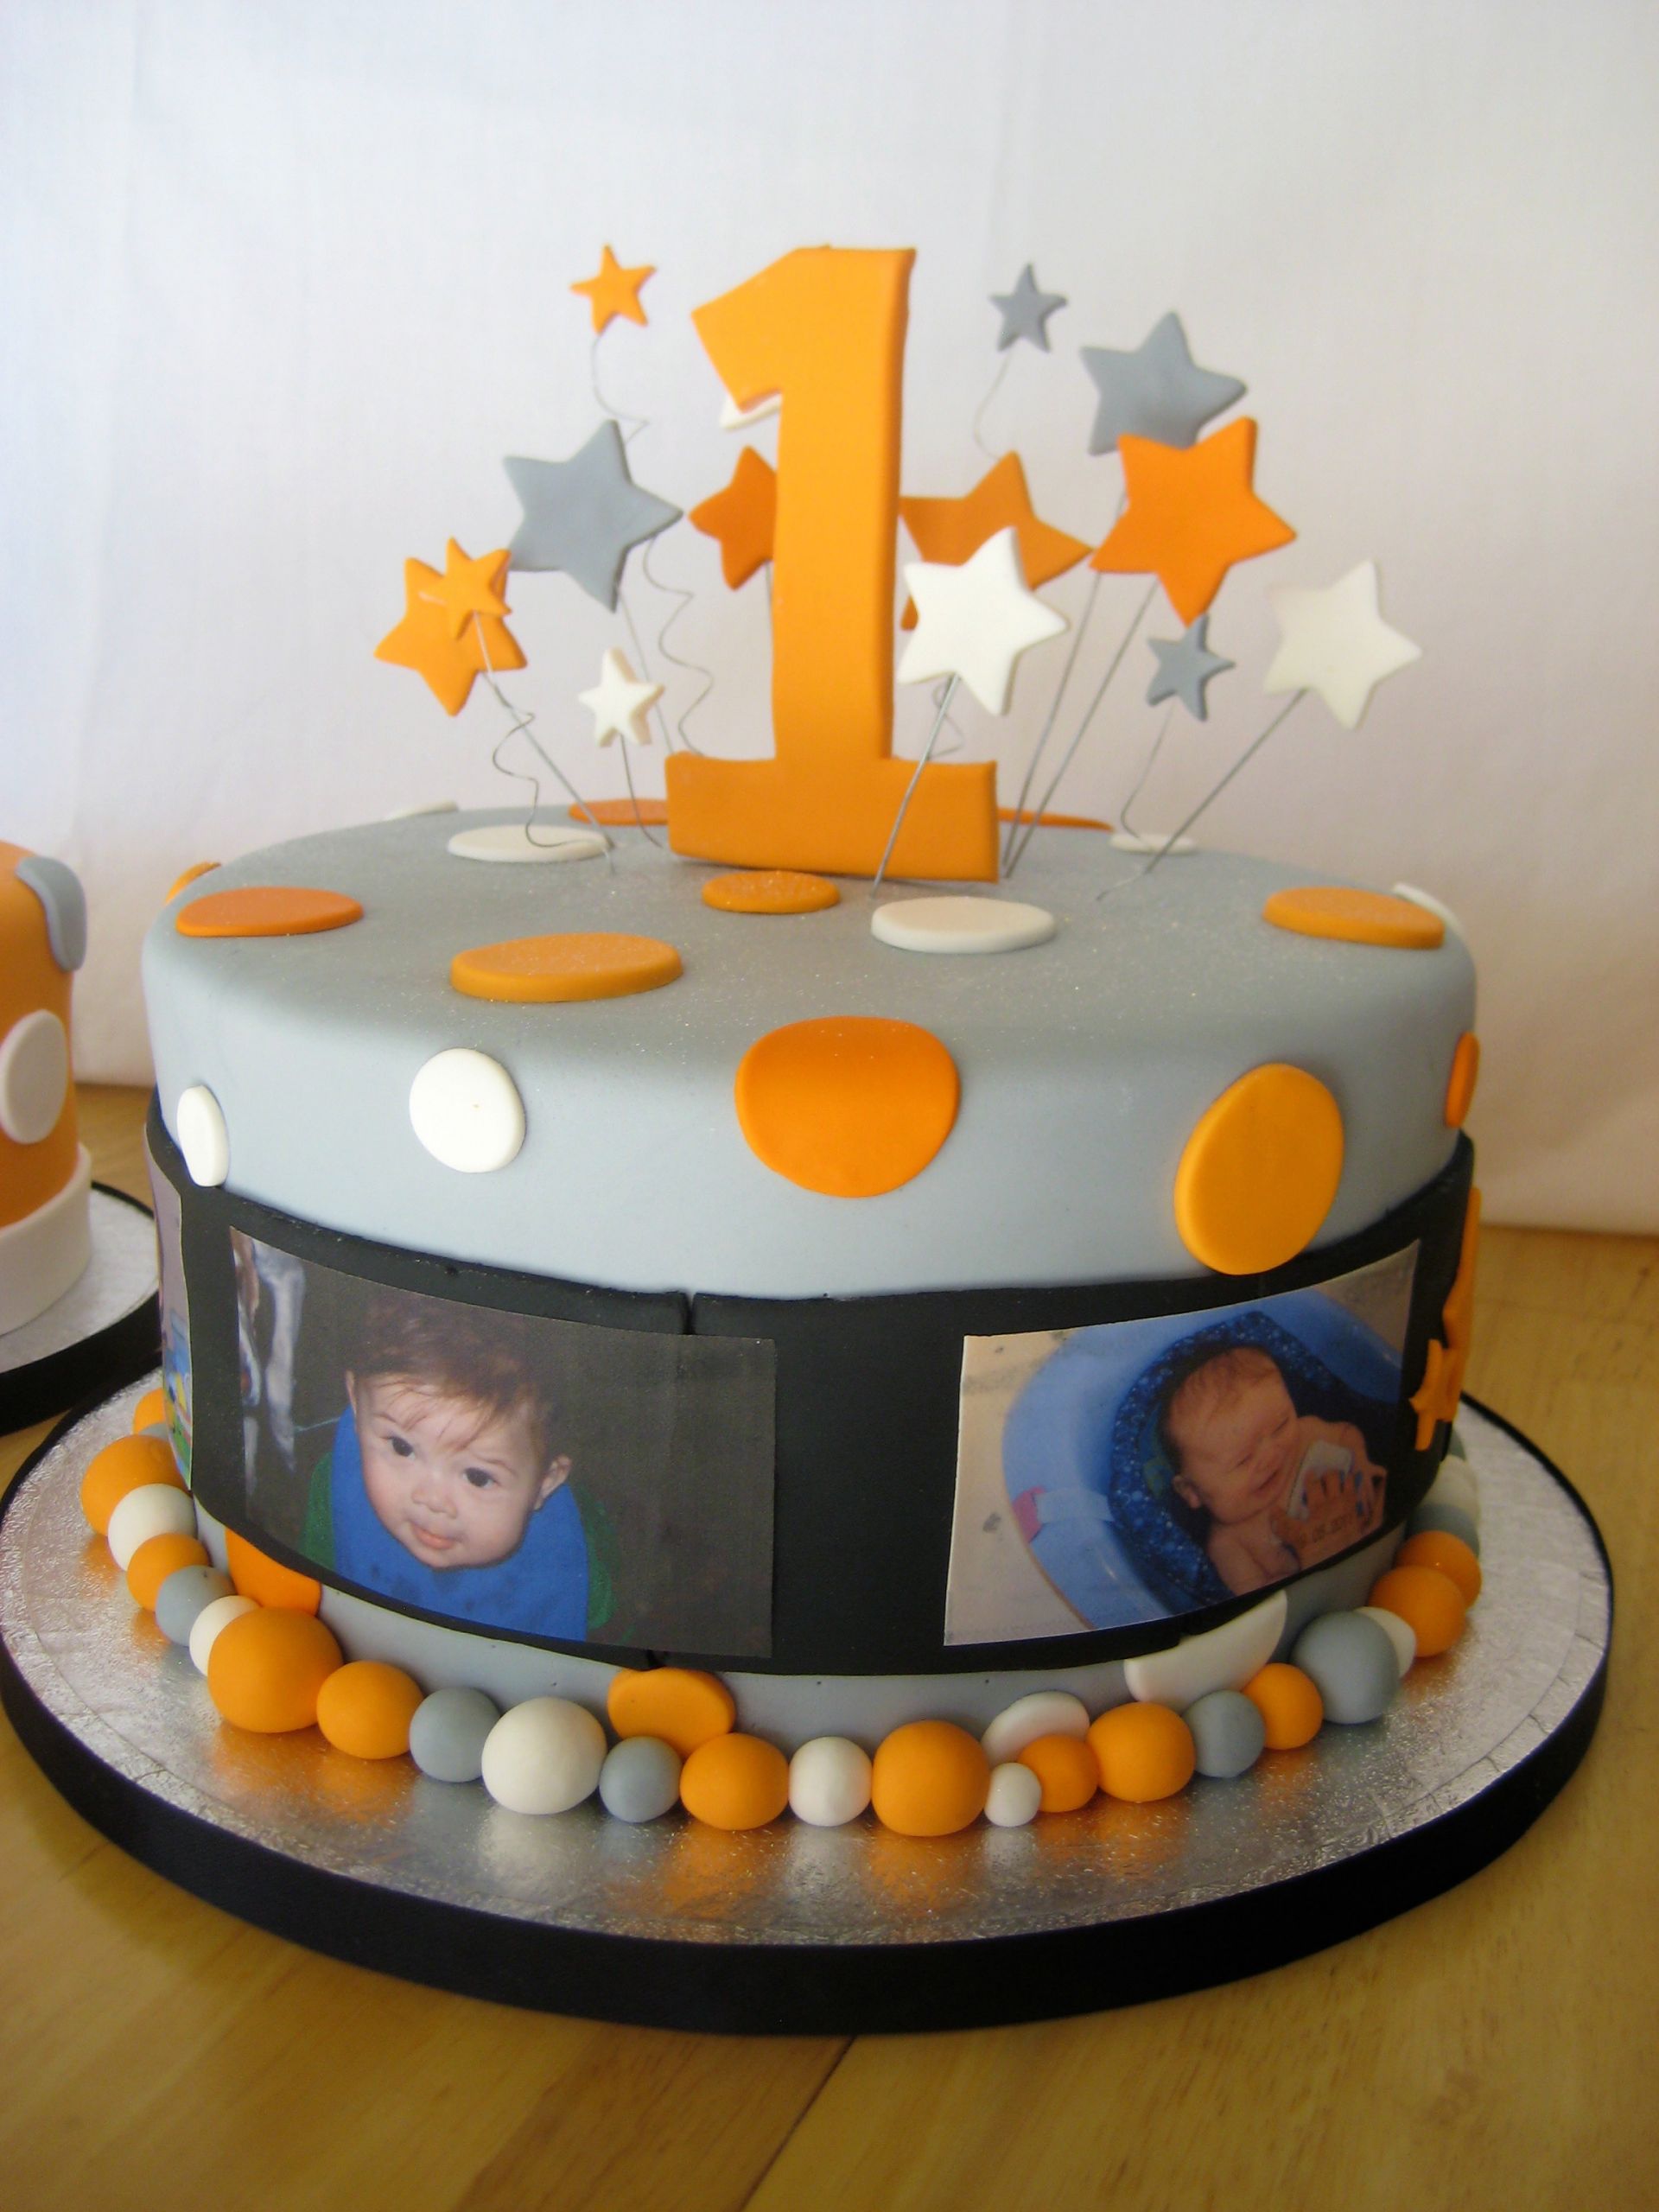 One Year Old Birthday Cake
 e Year Old in a FLASH cake – Stars Edible and